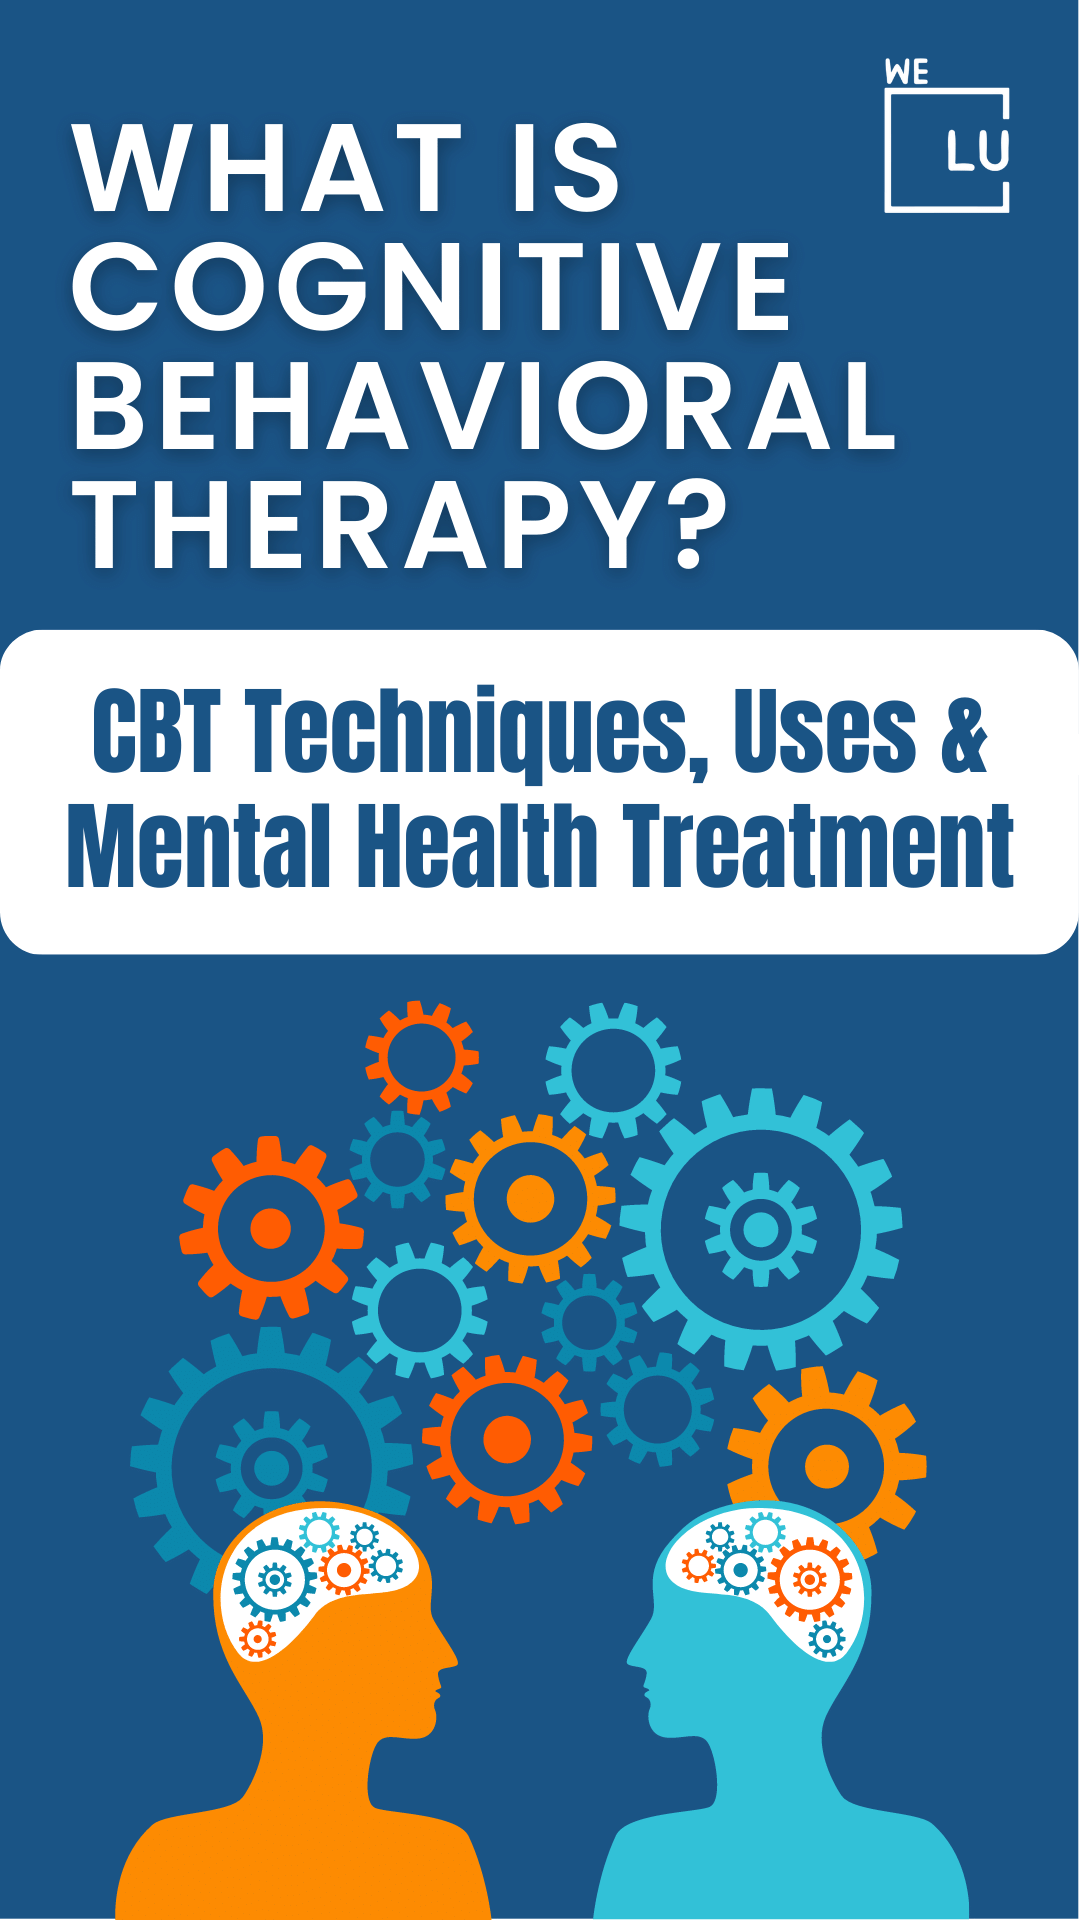 What is Cognitive Behavioral Therapy? CBT Techniques, Uses & Mental Health Treatment